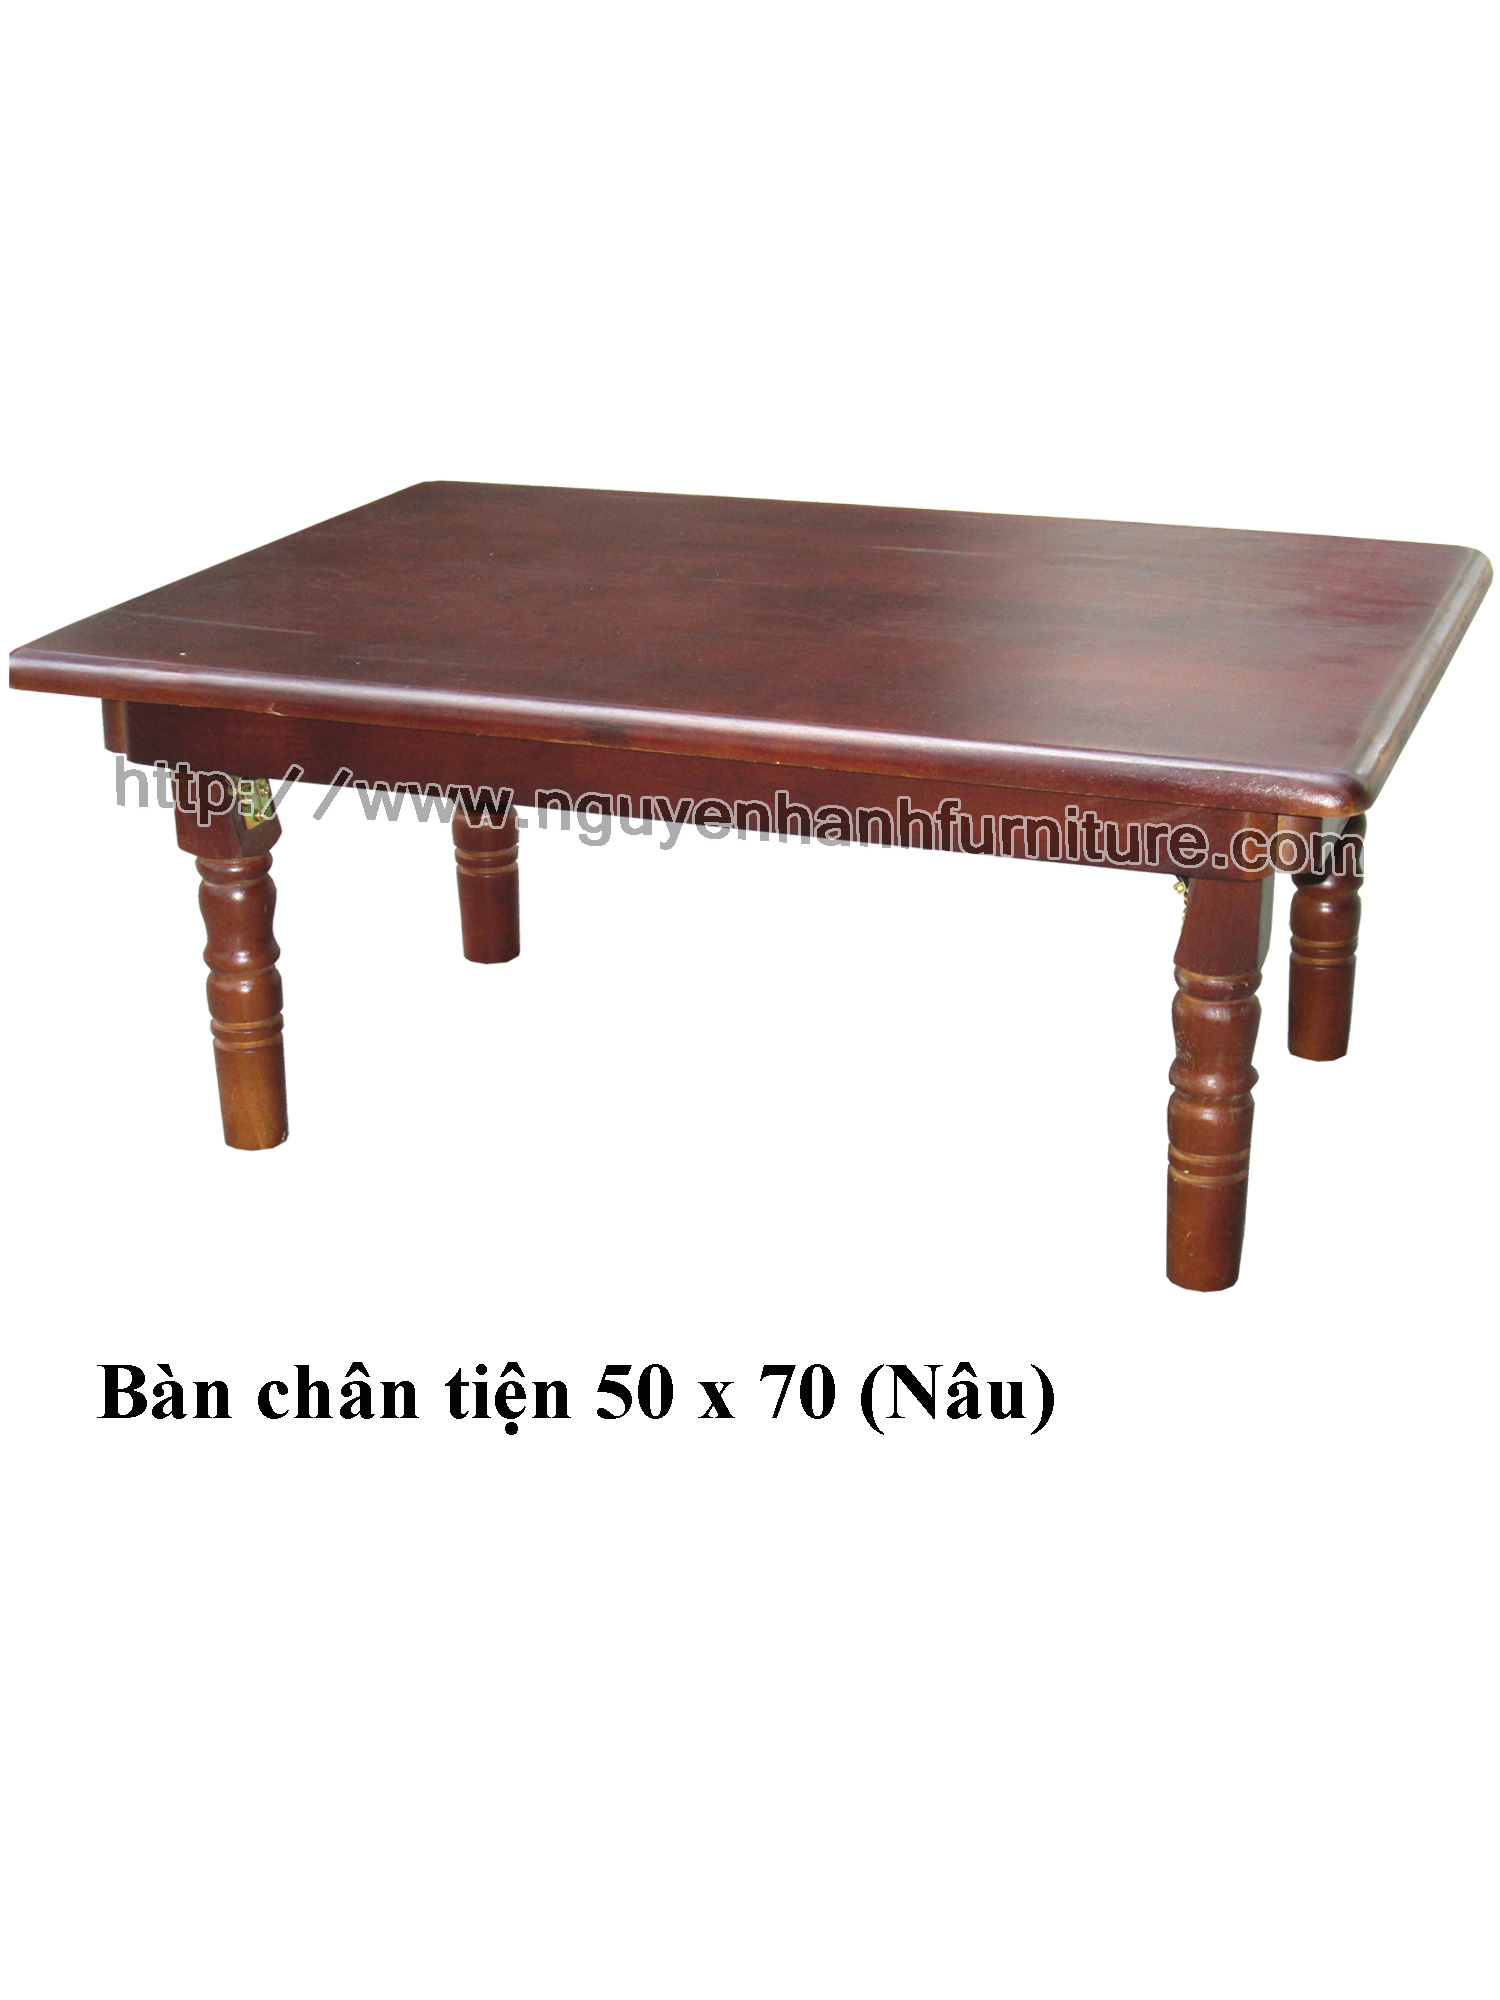 Name product: 5 x 7 Tea table with turnery legs (Brown) - Dimensions: 50 x 70 x 30 (H) - Description: Wood natural rubber